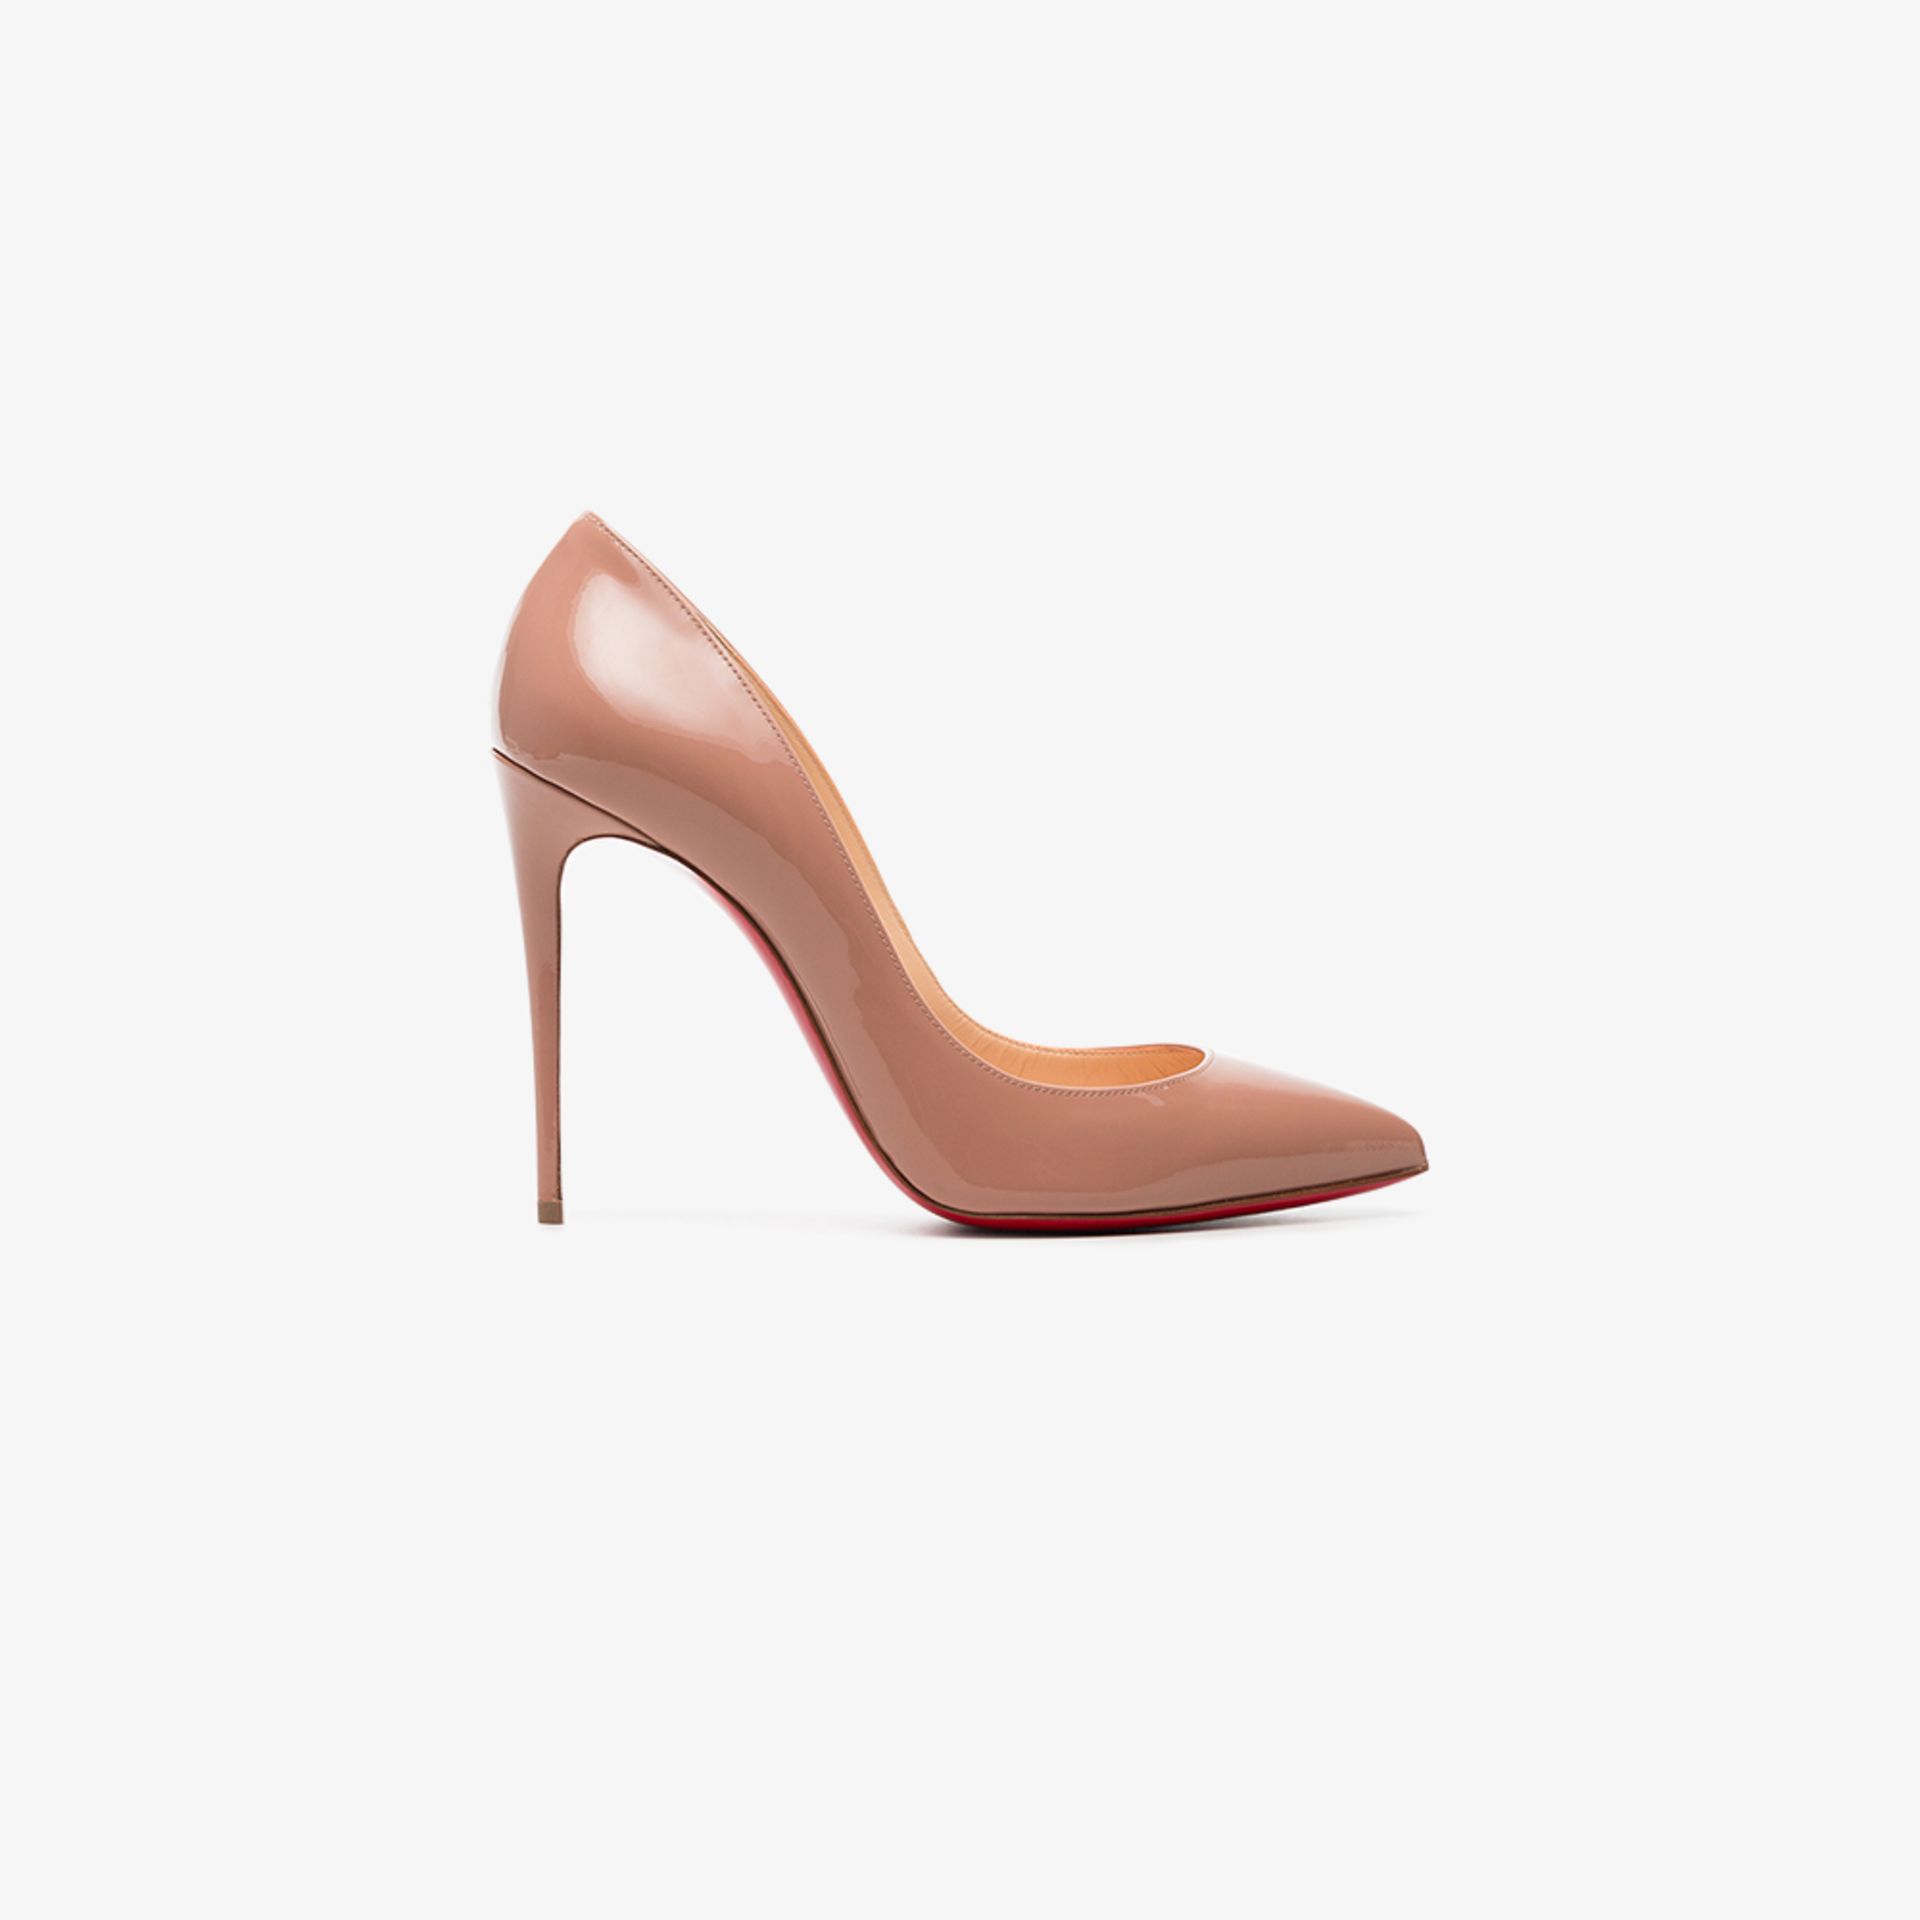 christian louboutin pigalle follies nude